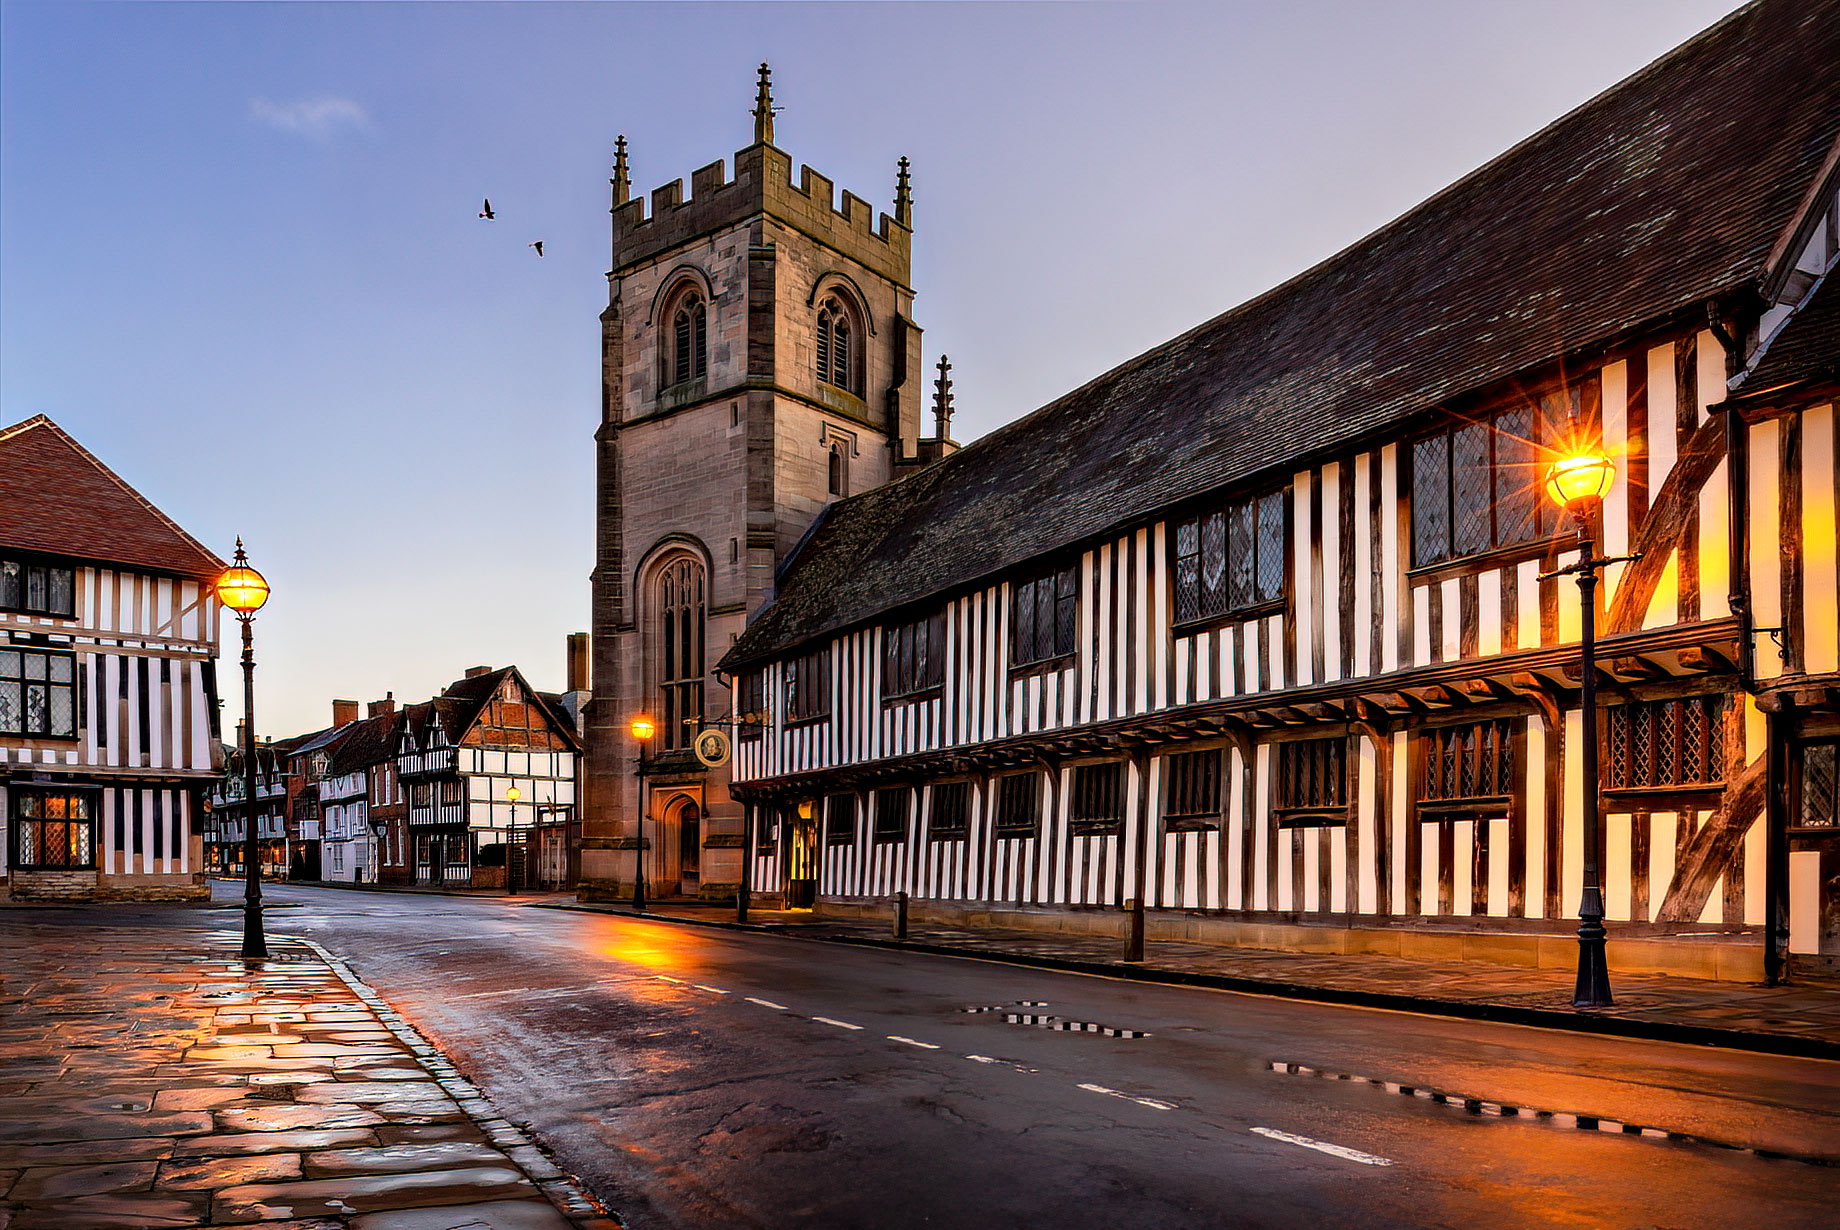 Stratford-upon-Avon, England – The Birthplace of William Shakespeare